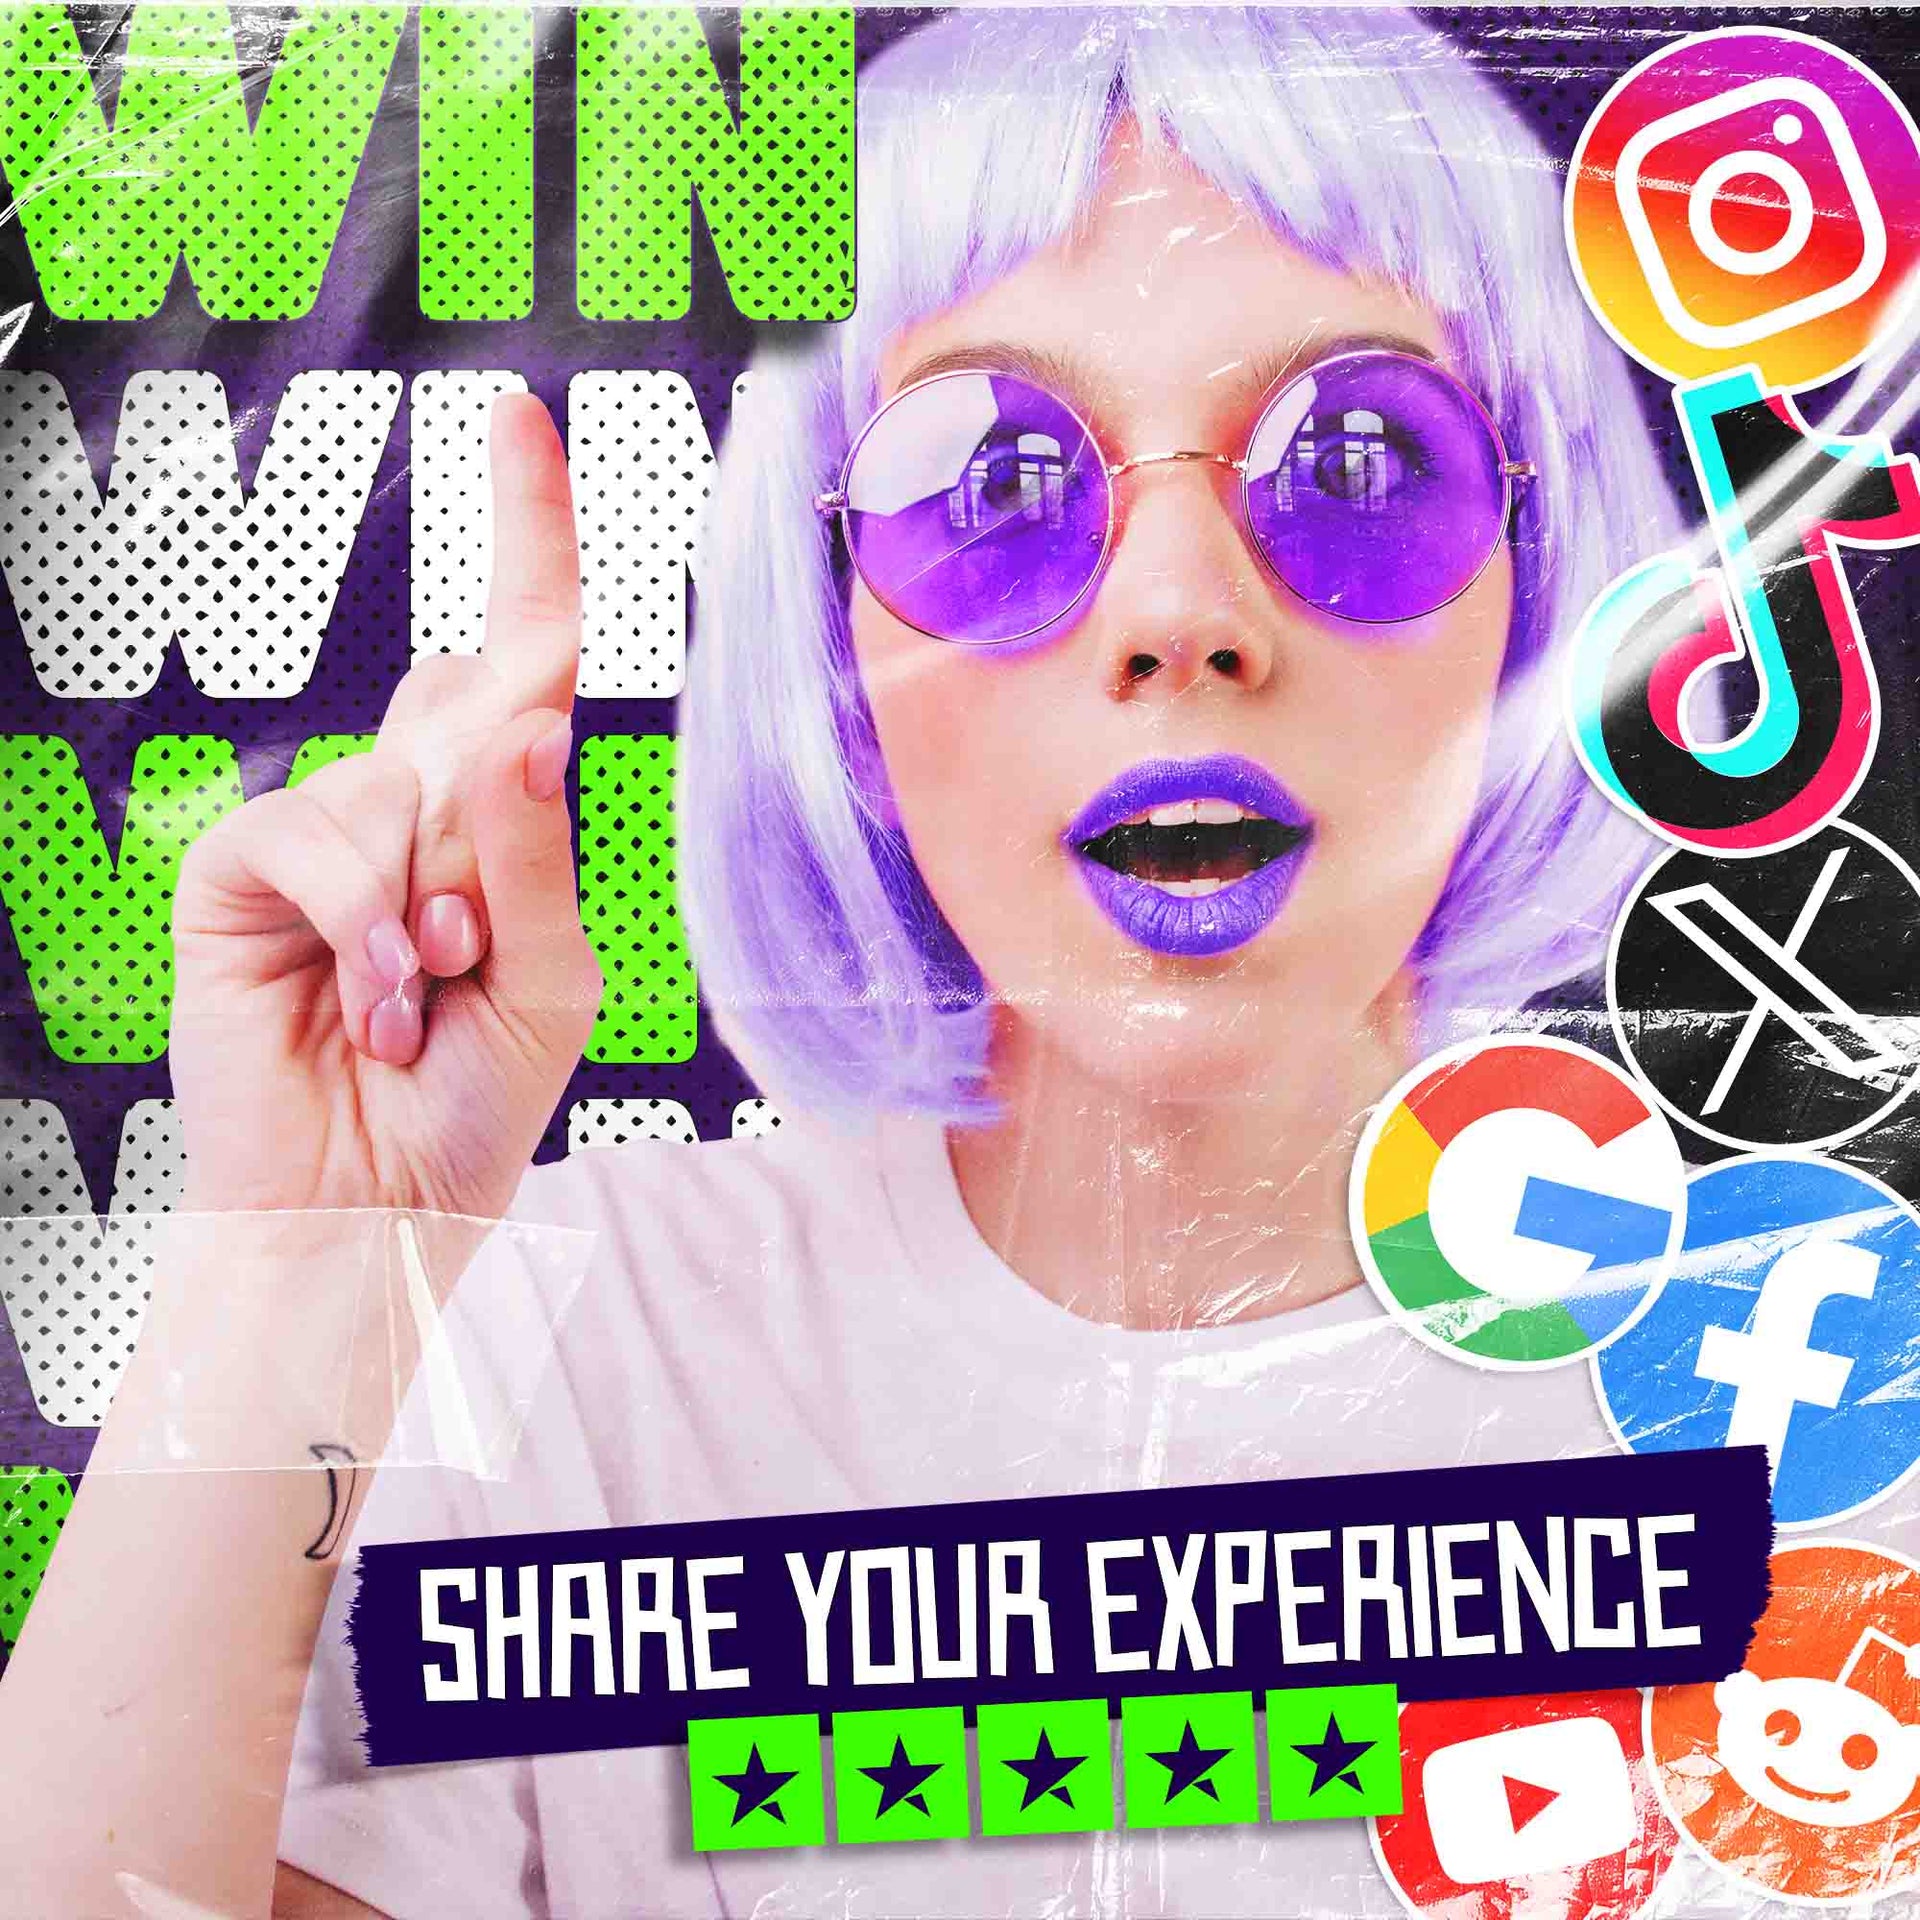 Trendy Fashionista Girl wearing purple sunglasses and purple lipstick pointing at the giveaway showing social media icons and reviews. Read on to find out more about the terms and condition for the giveaway.